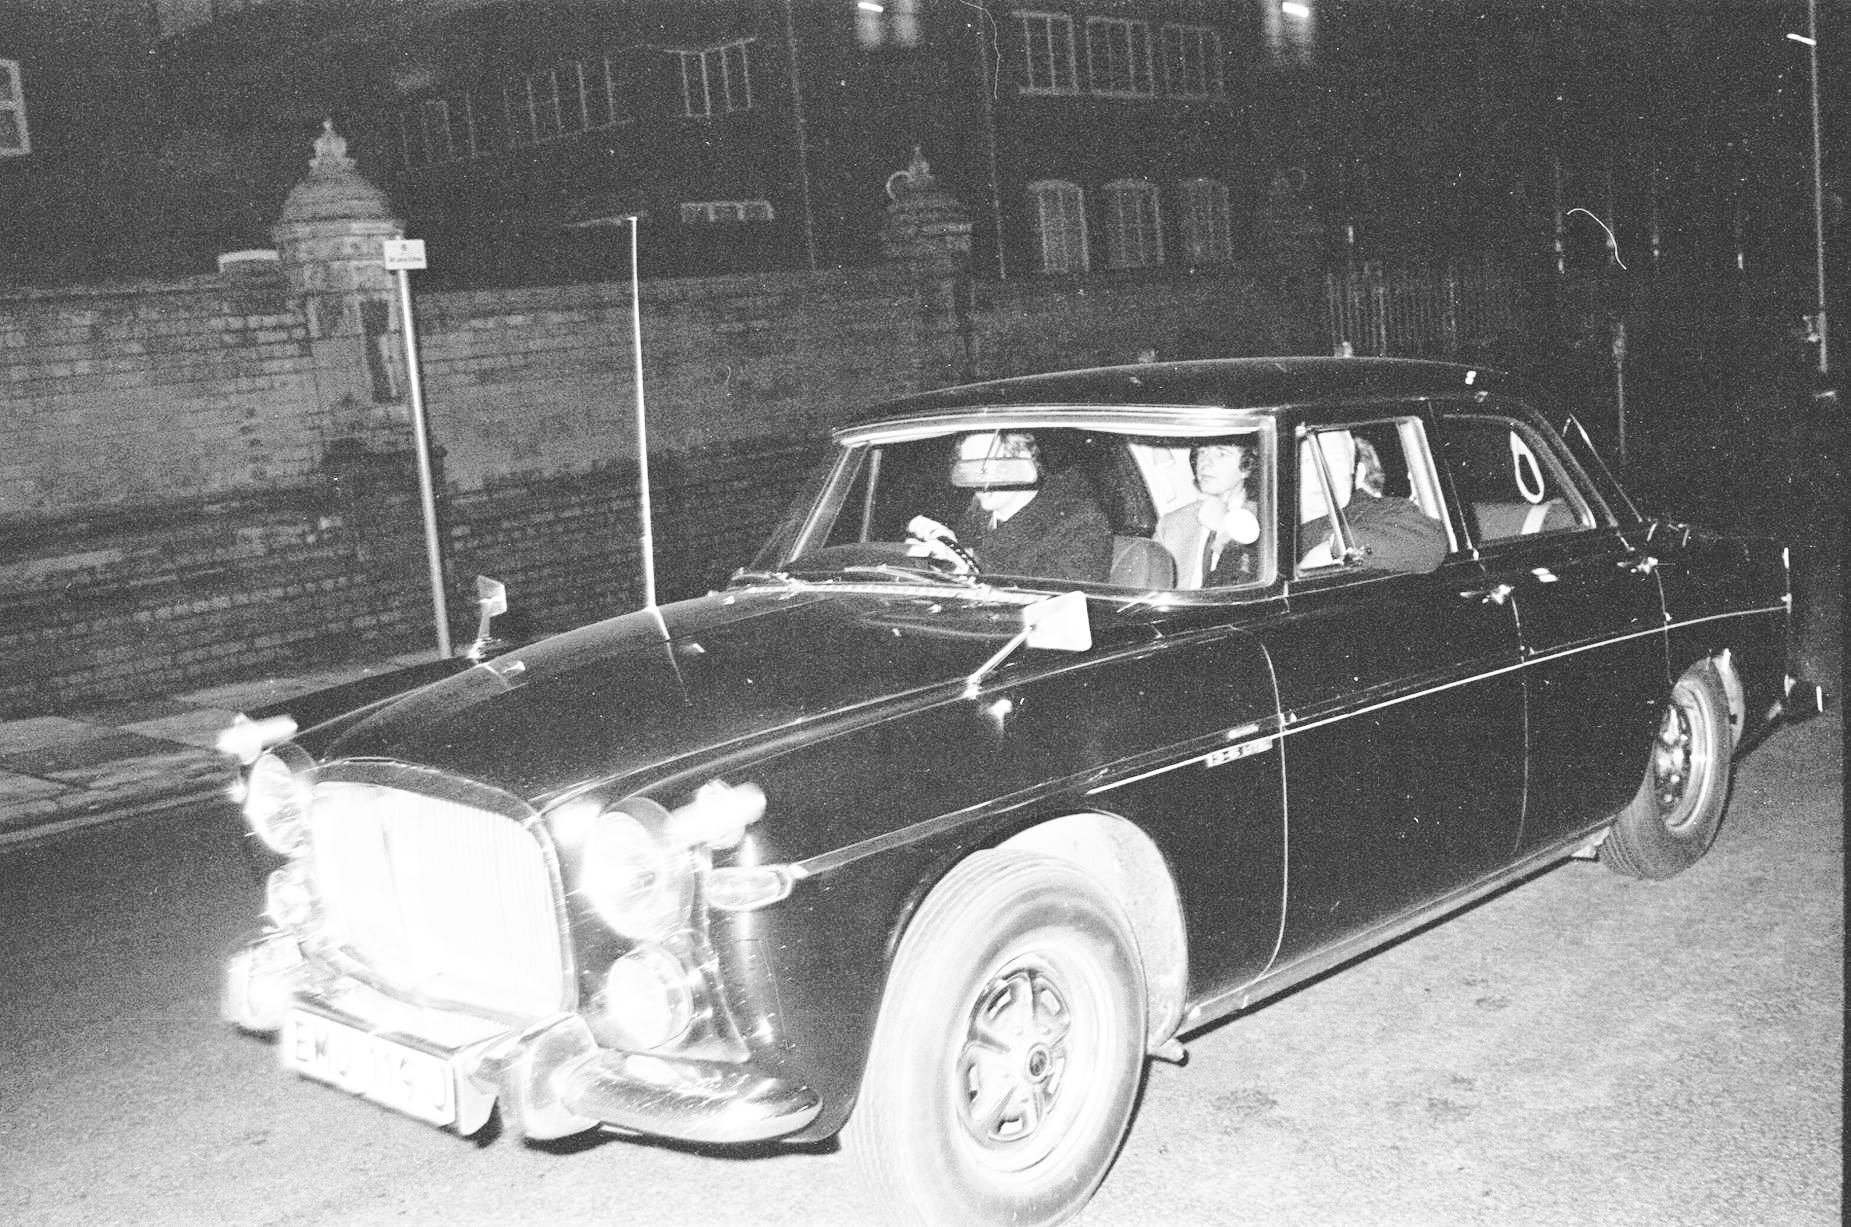 ROVER P5B DS BHAM PUBS Edward-Heath-visits-the-site-and-victims-of-the-Birmingham-pub-bombings-14.jpg  by Villain